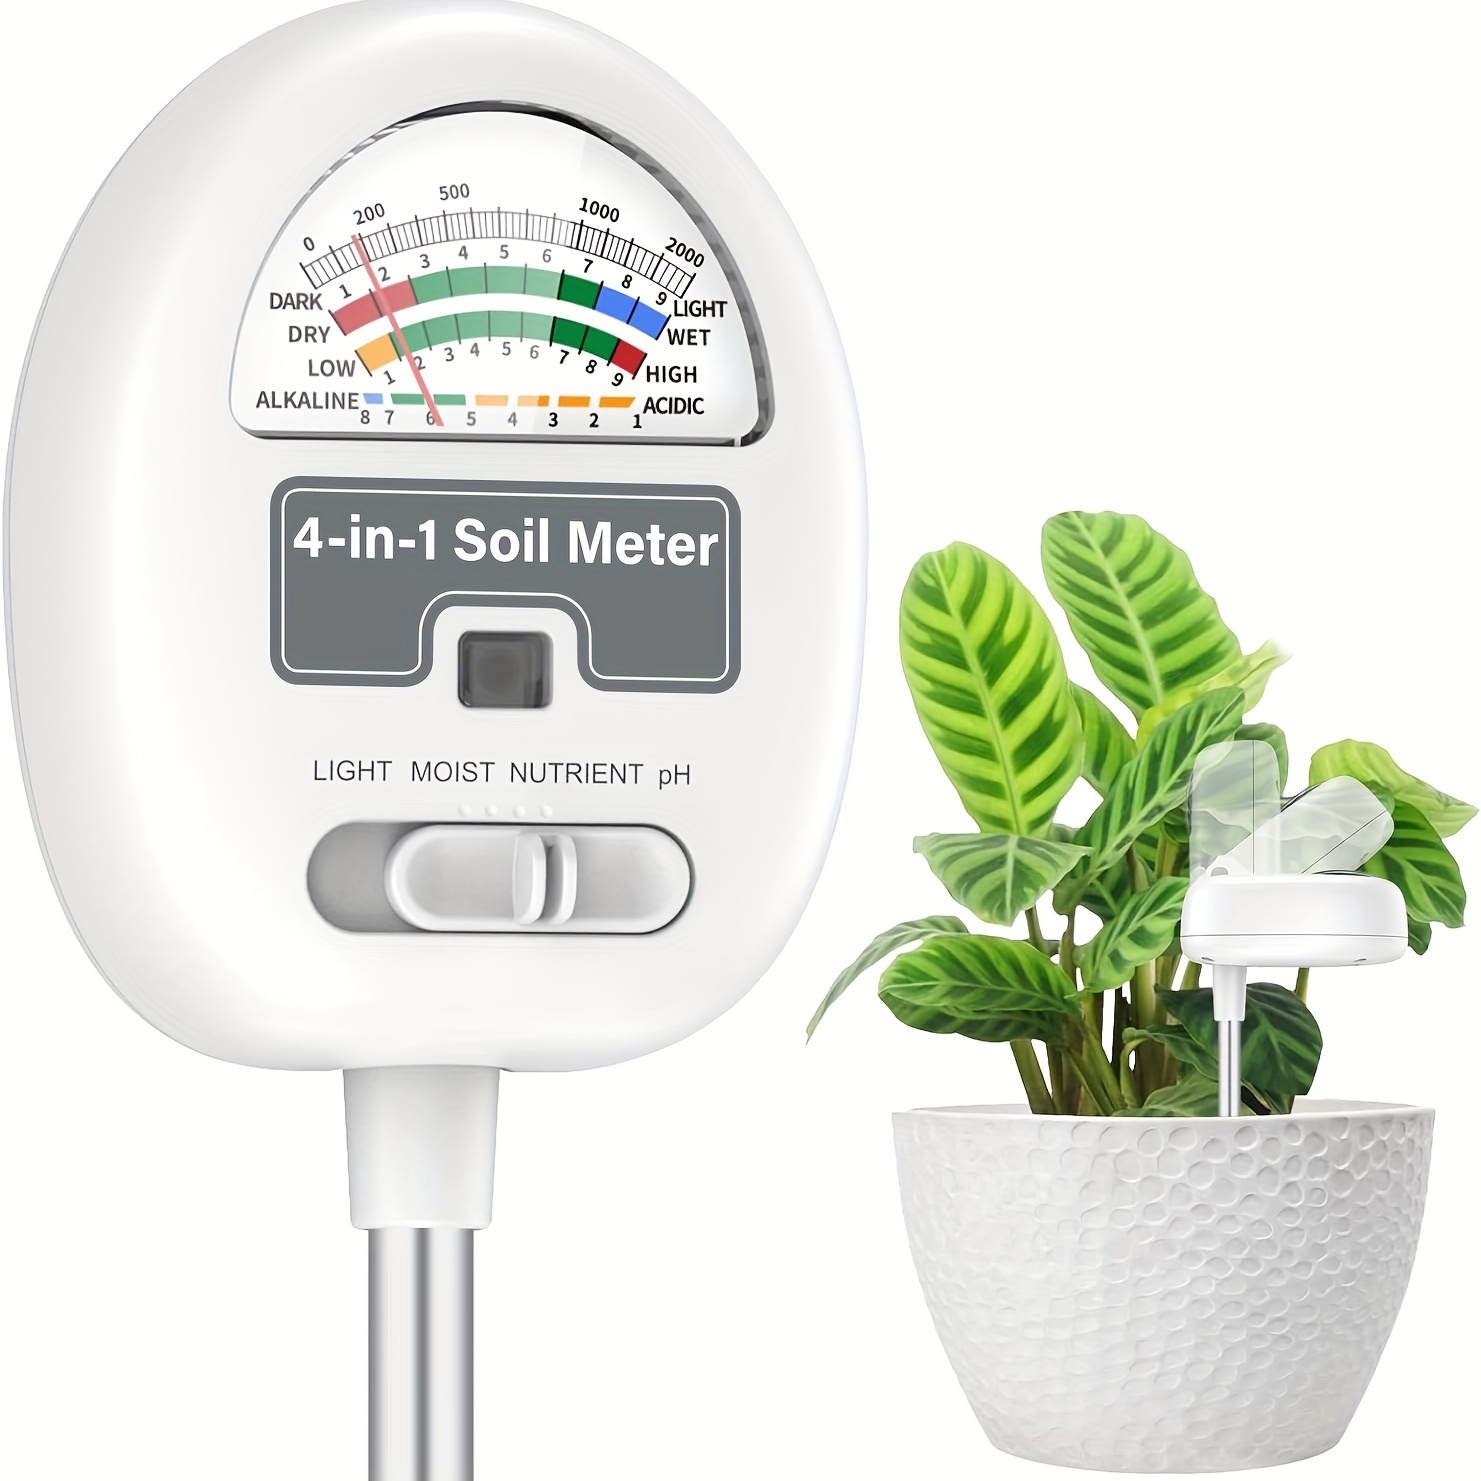 

4-in-1 Soil Health Tester - Moisture, Ph, Light & Nutrients Meter For Gardening, Lawn Care & Farming - Durable Metal, No Batteries Needed